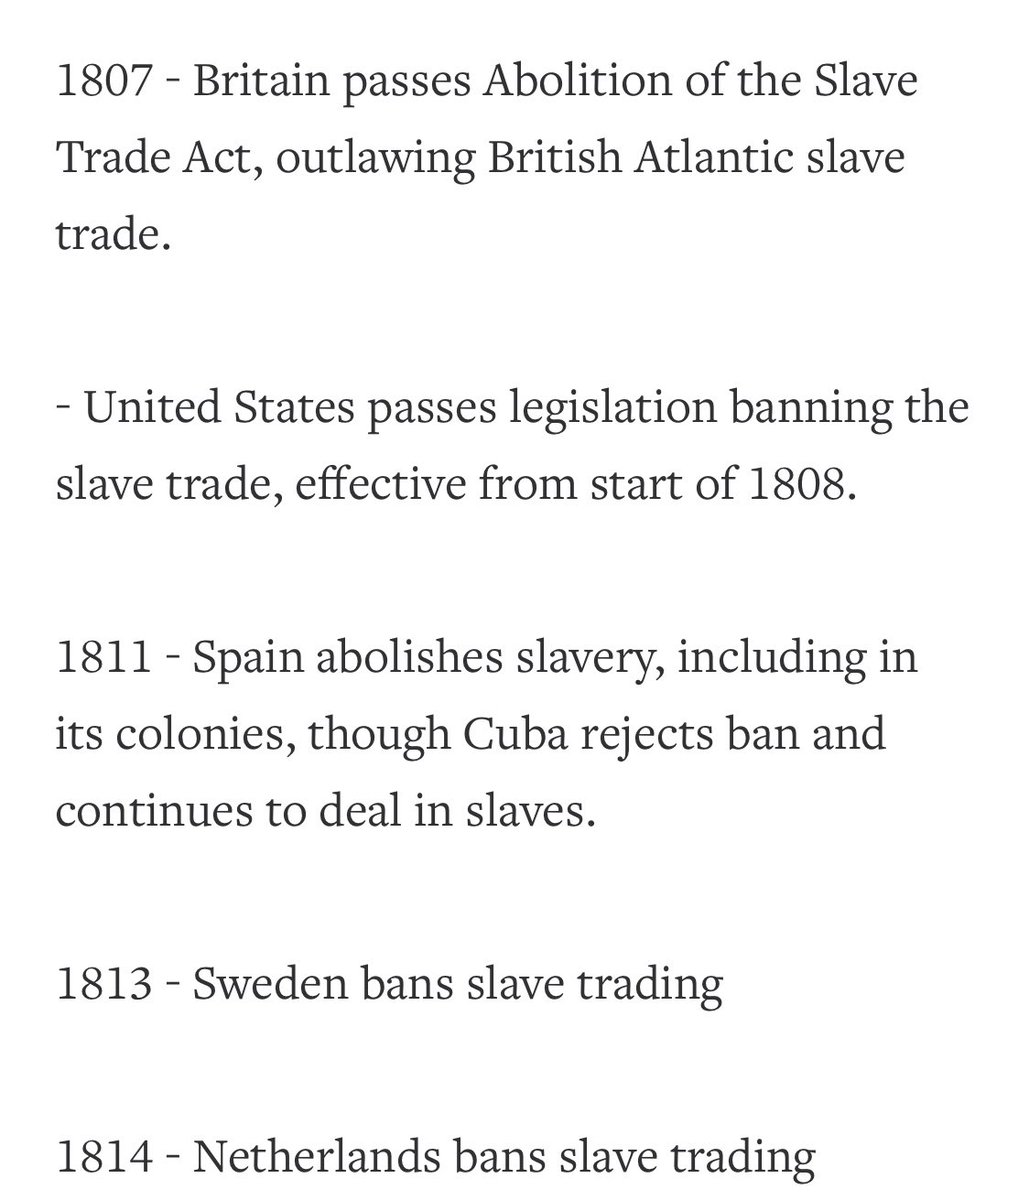 Meanwhile the erasure of the Haitian revolution runs deep. For example as of today  @Google’s “people also ask” algorithm on “who was the first to abolish slavery” = Britain. While  @Reuters’ abolition timeline from 2007 skips Haiti completely 